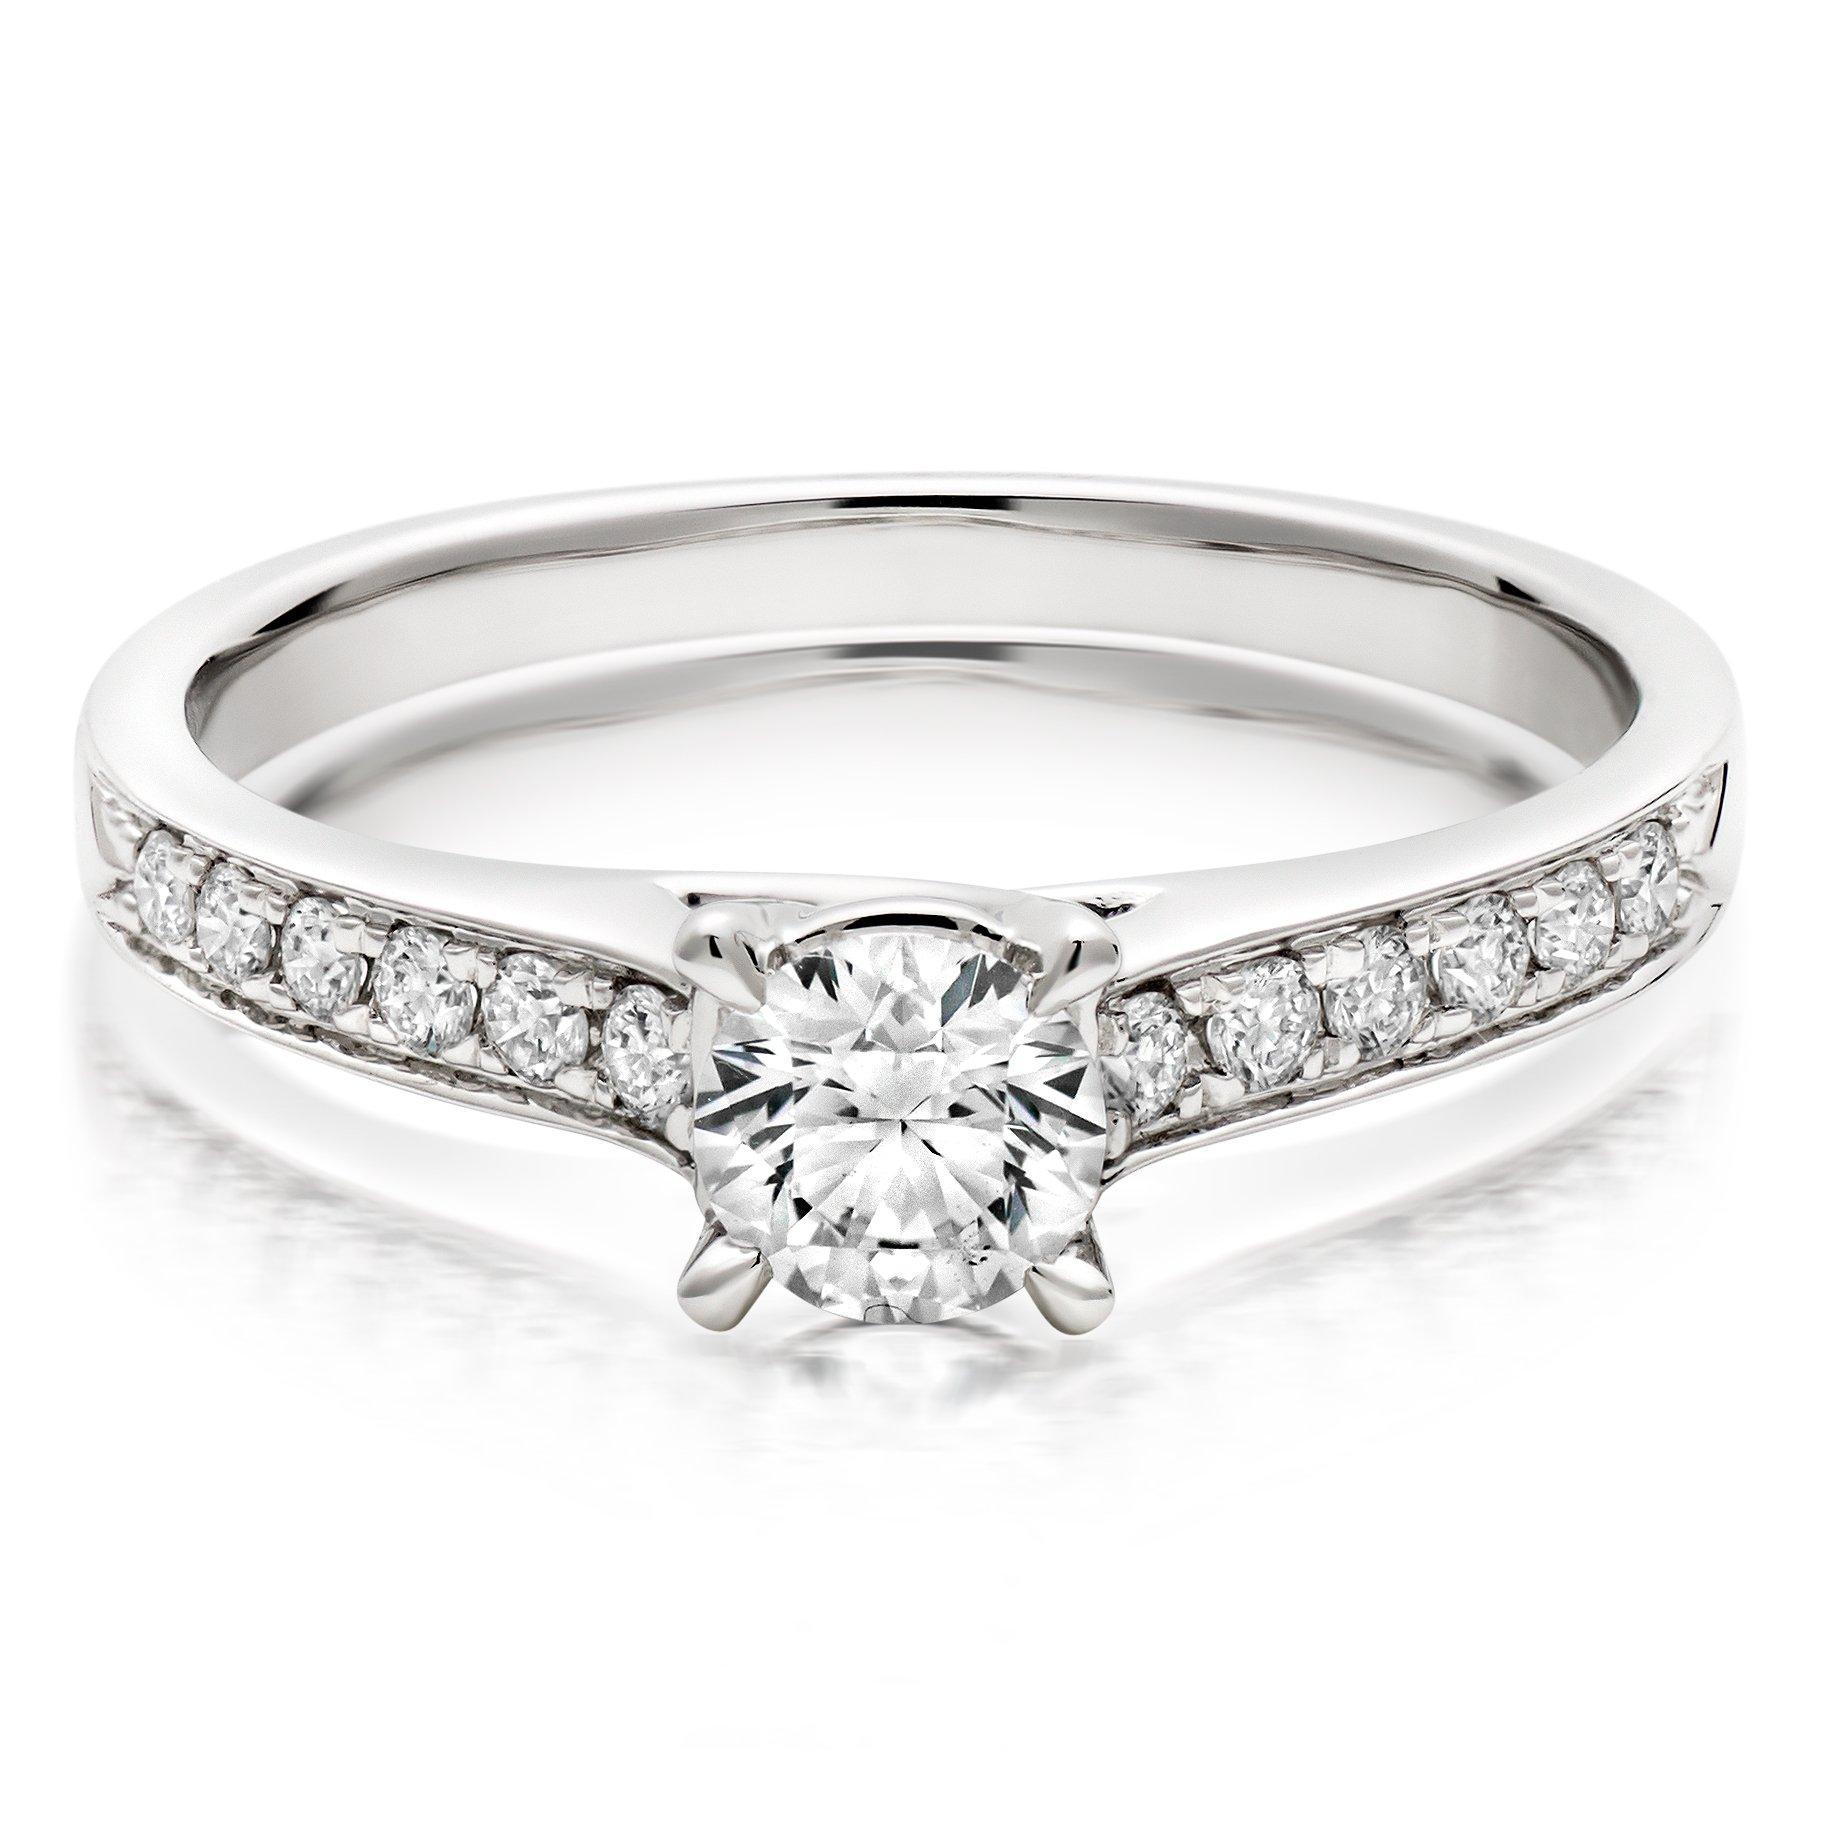 18ct White Gold Diamond Solitaire Ring | 0000221 | Beaverbrooks the ...